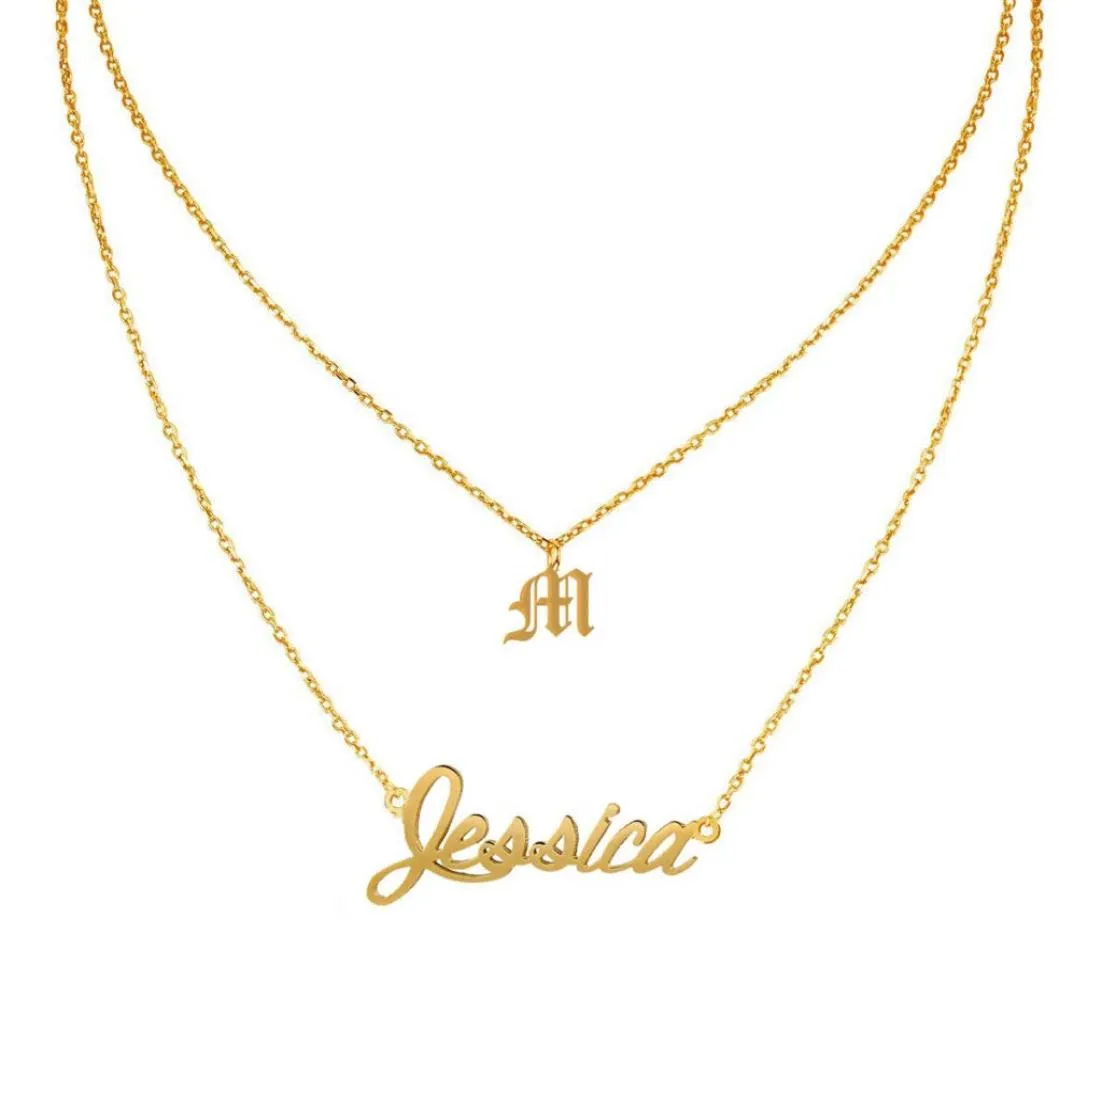 Personalized Custom Name Spaced Necklace Pendant for Women Birthday Any Name 2 Row Layerd Necklace Jewelry Gift Gold Rose Gold N1104024